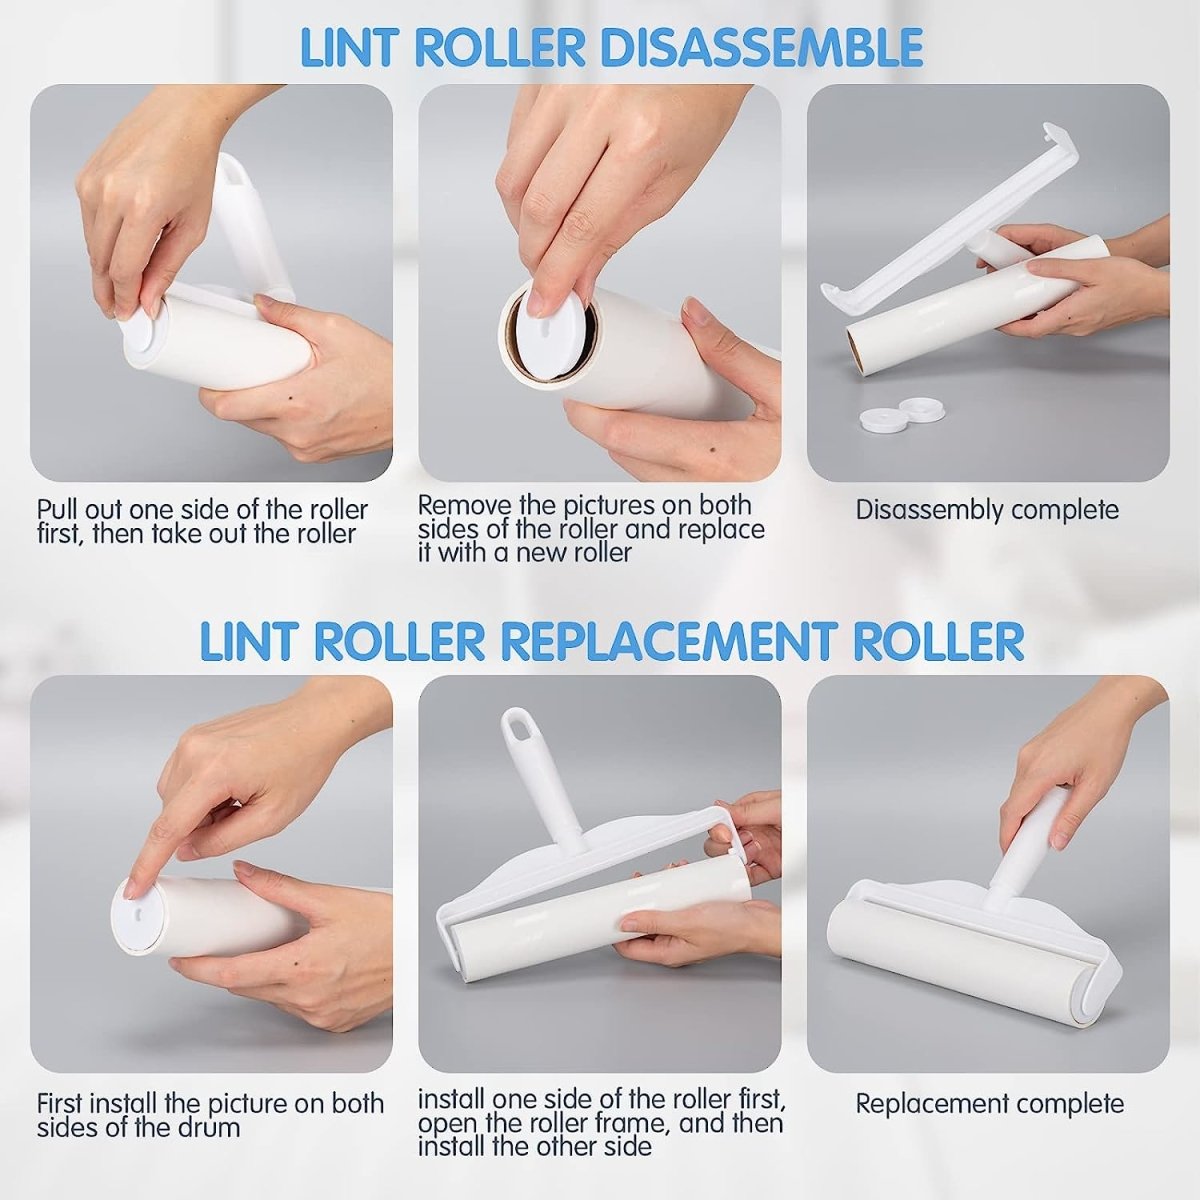 Lint Remover Roller for Carpet Cleaner 1 Lint Roller With 3 Refills (60 Sheet Each) Lint Roller- Royalkart - The Urban Store